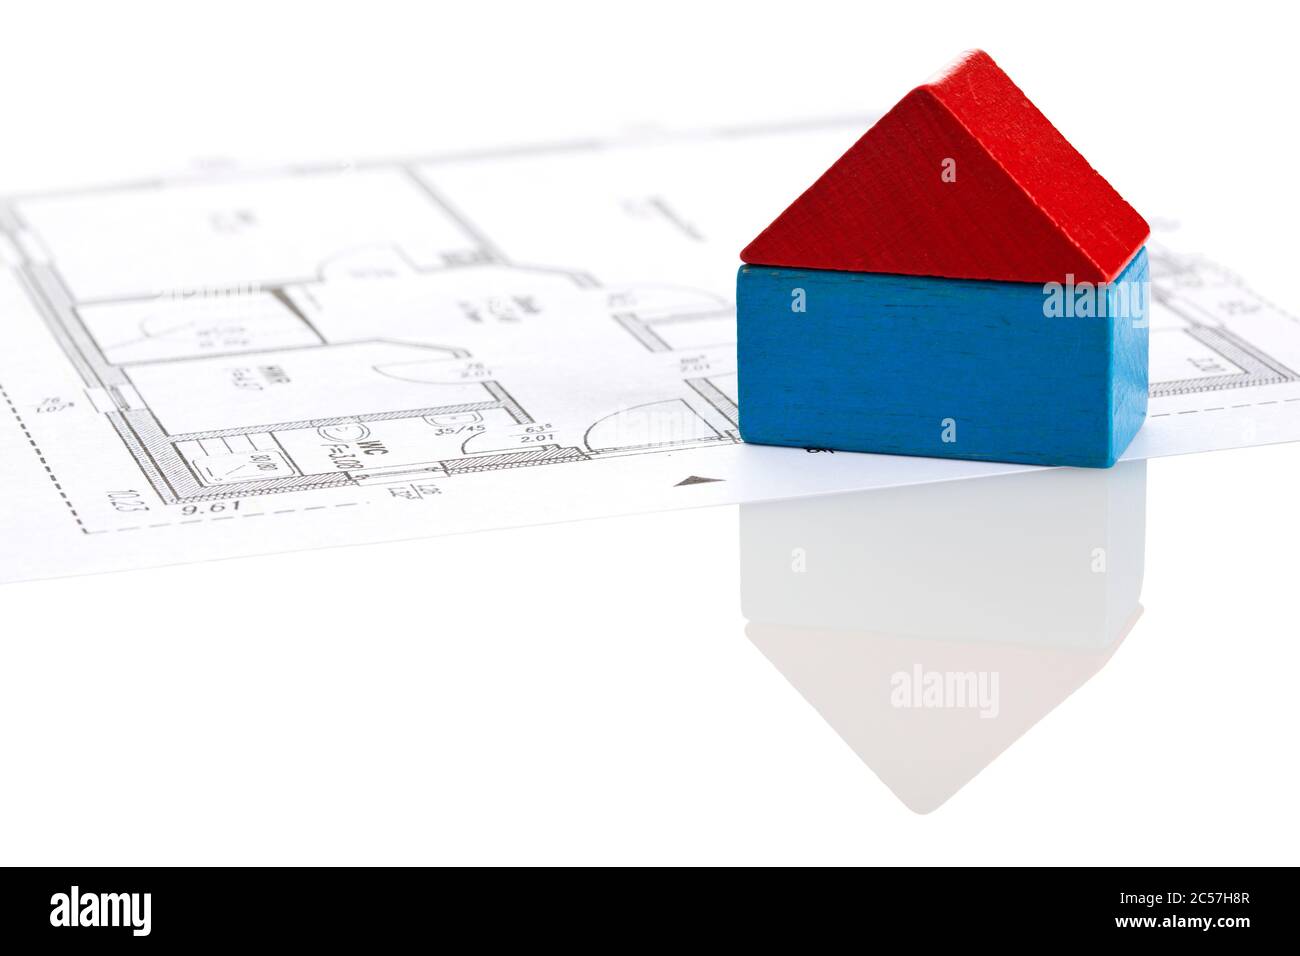 house made of two toy blocks on blueprint of floor plan Stock Photo